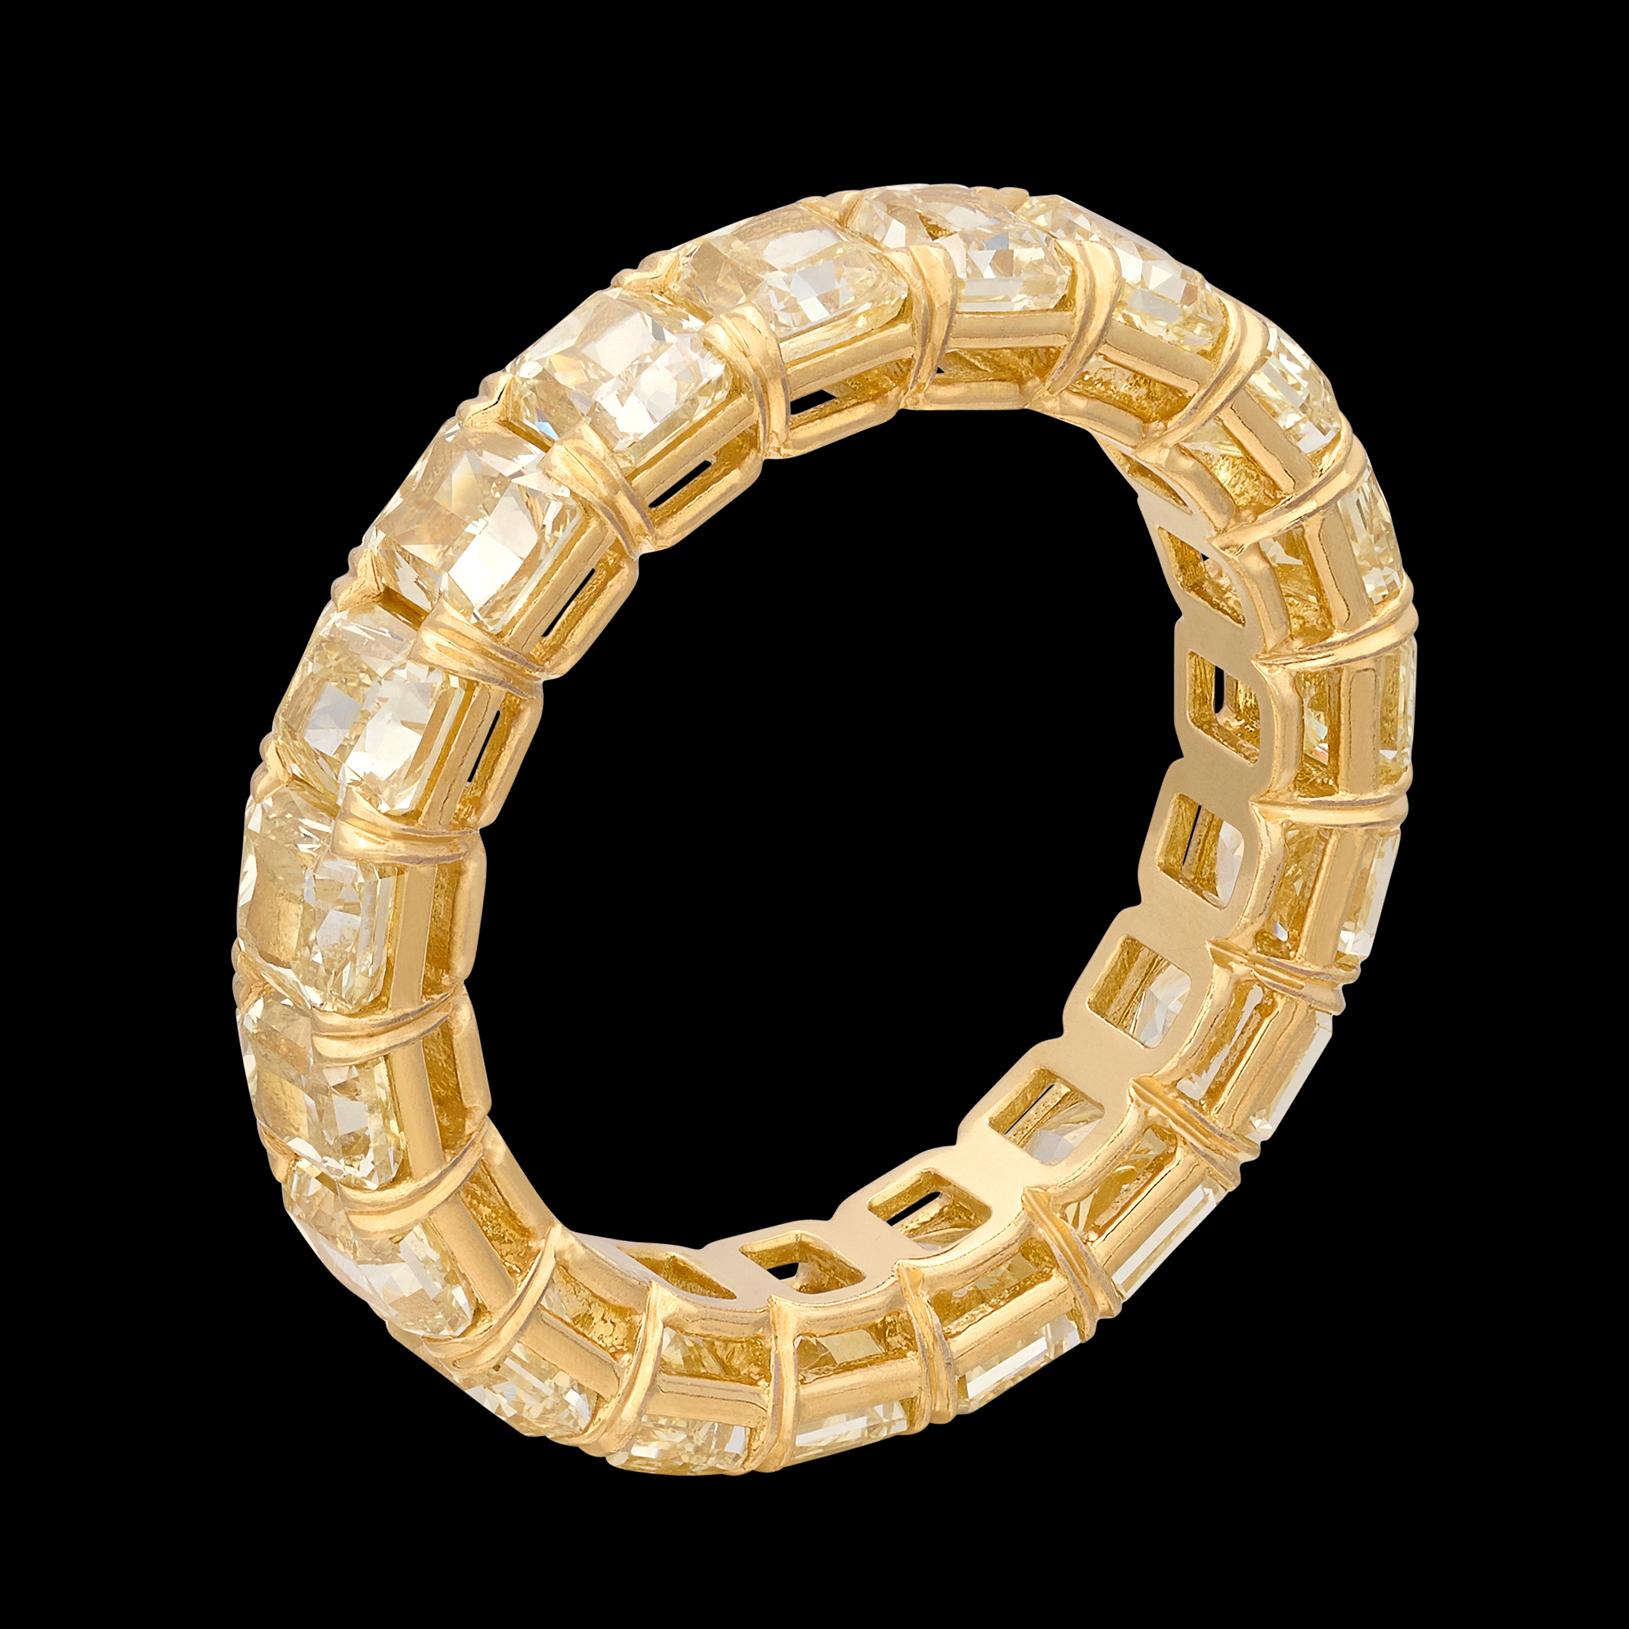 There are eternity bands, and then there's THIS! This extraordinary 18 karat yellow gold eternity band features 19 perfectly matched yellow radiant cut diamonds, expertly set with shared prongs to make up a truly fantastic piece of jewelry. The